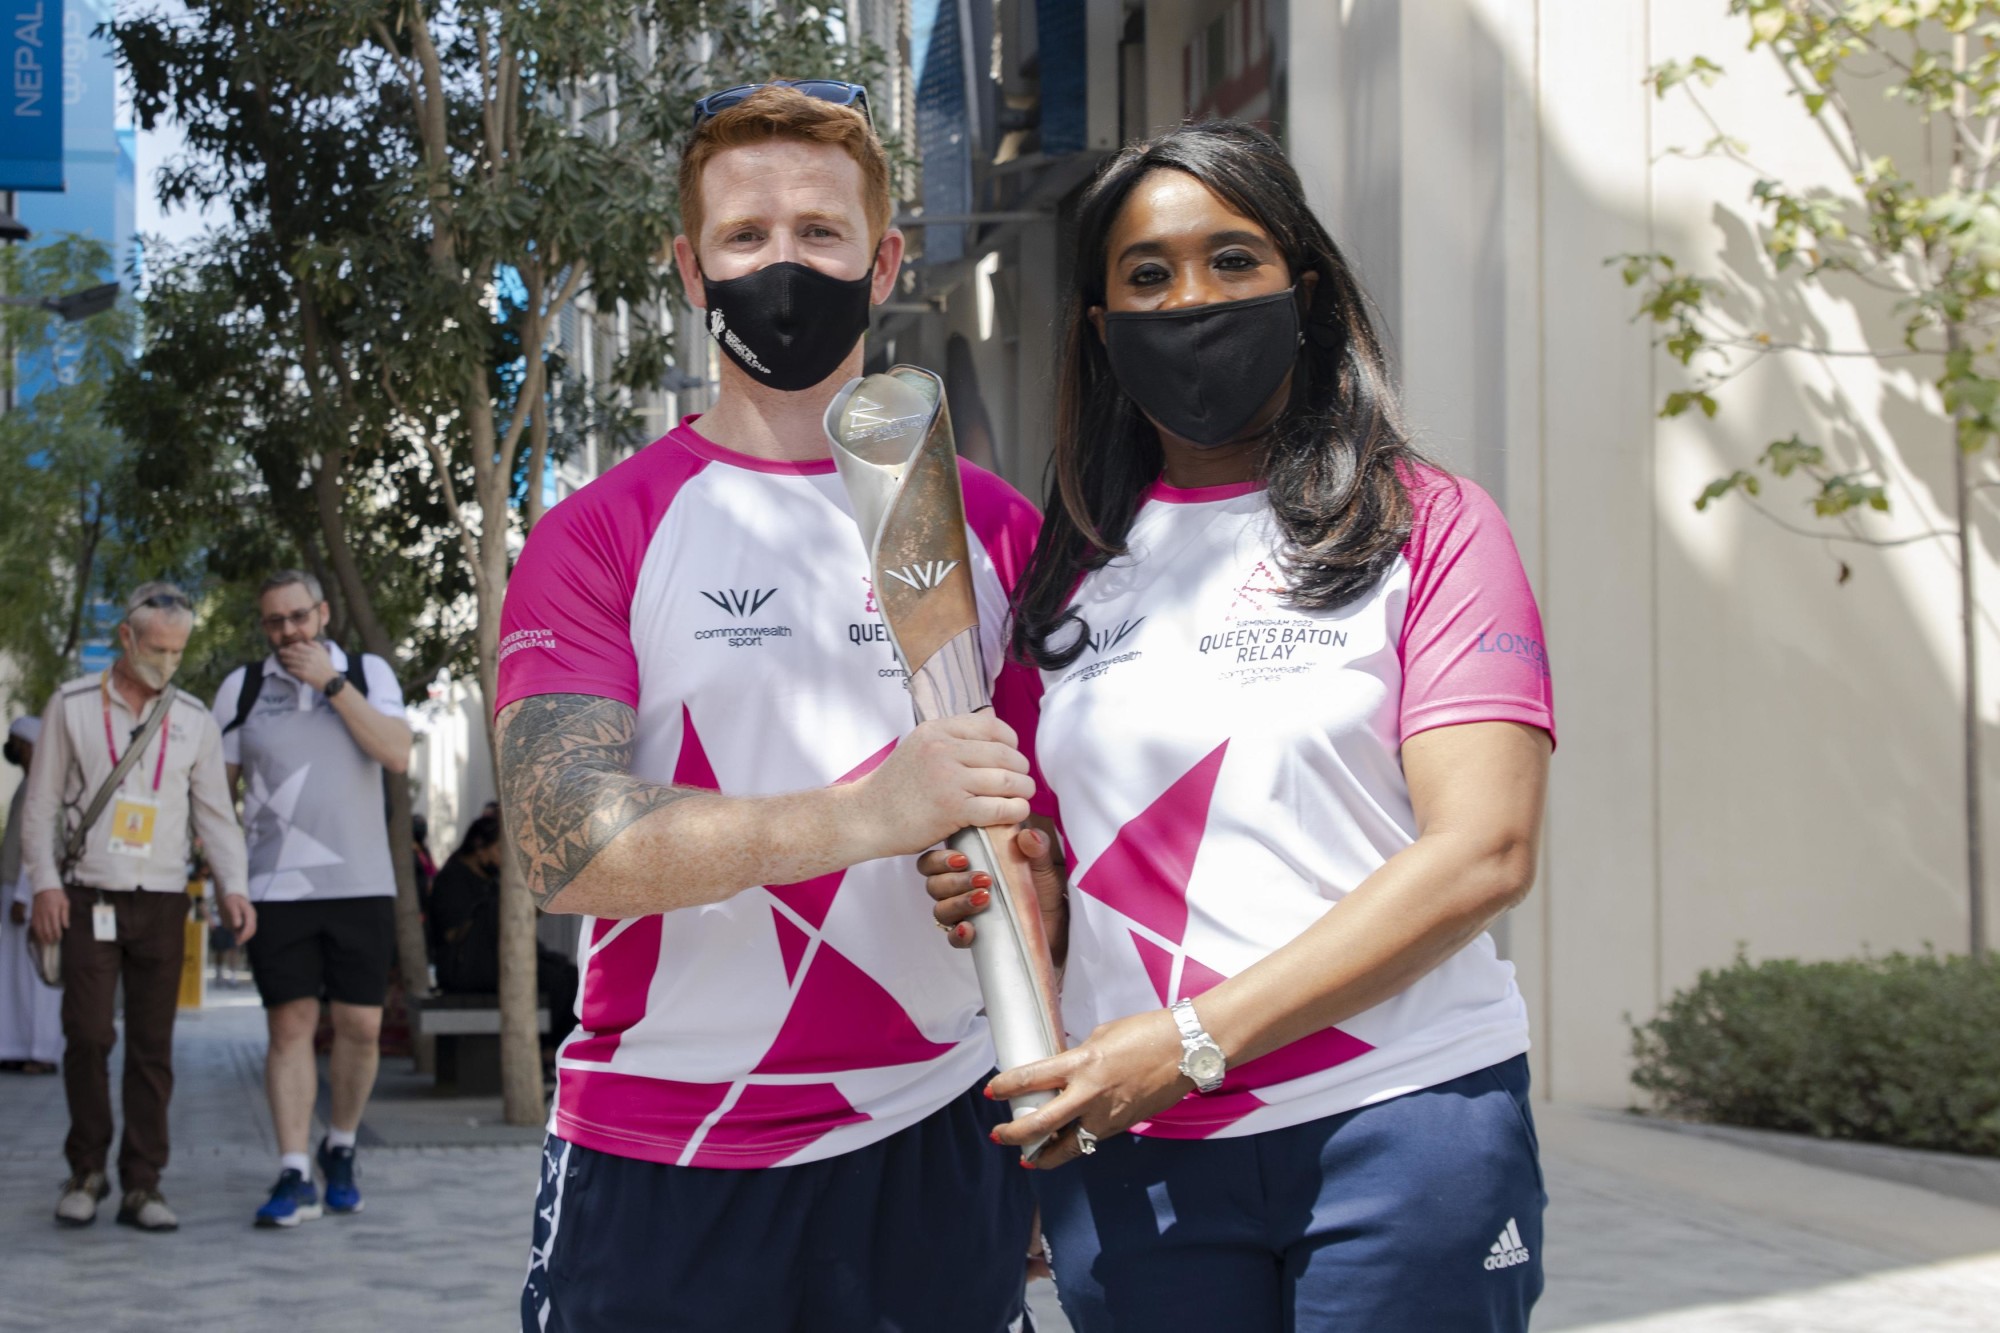 James Simpson (L), hands over the baton to Tessa Sanderson (R), Baton Bearer at the Queen-s Baton Relay event outside the Barbados Pavilion during the United Kingdom National Day celebrations m46426